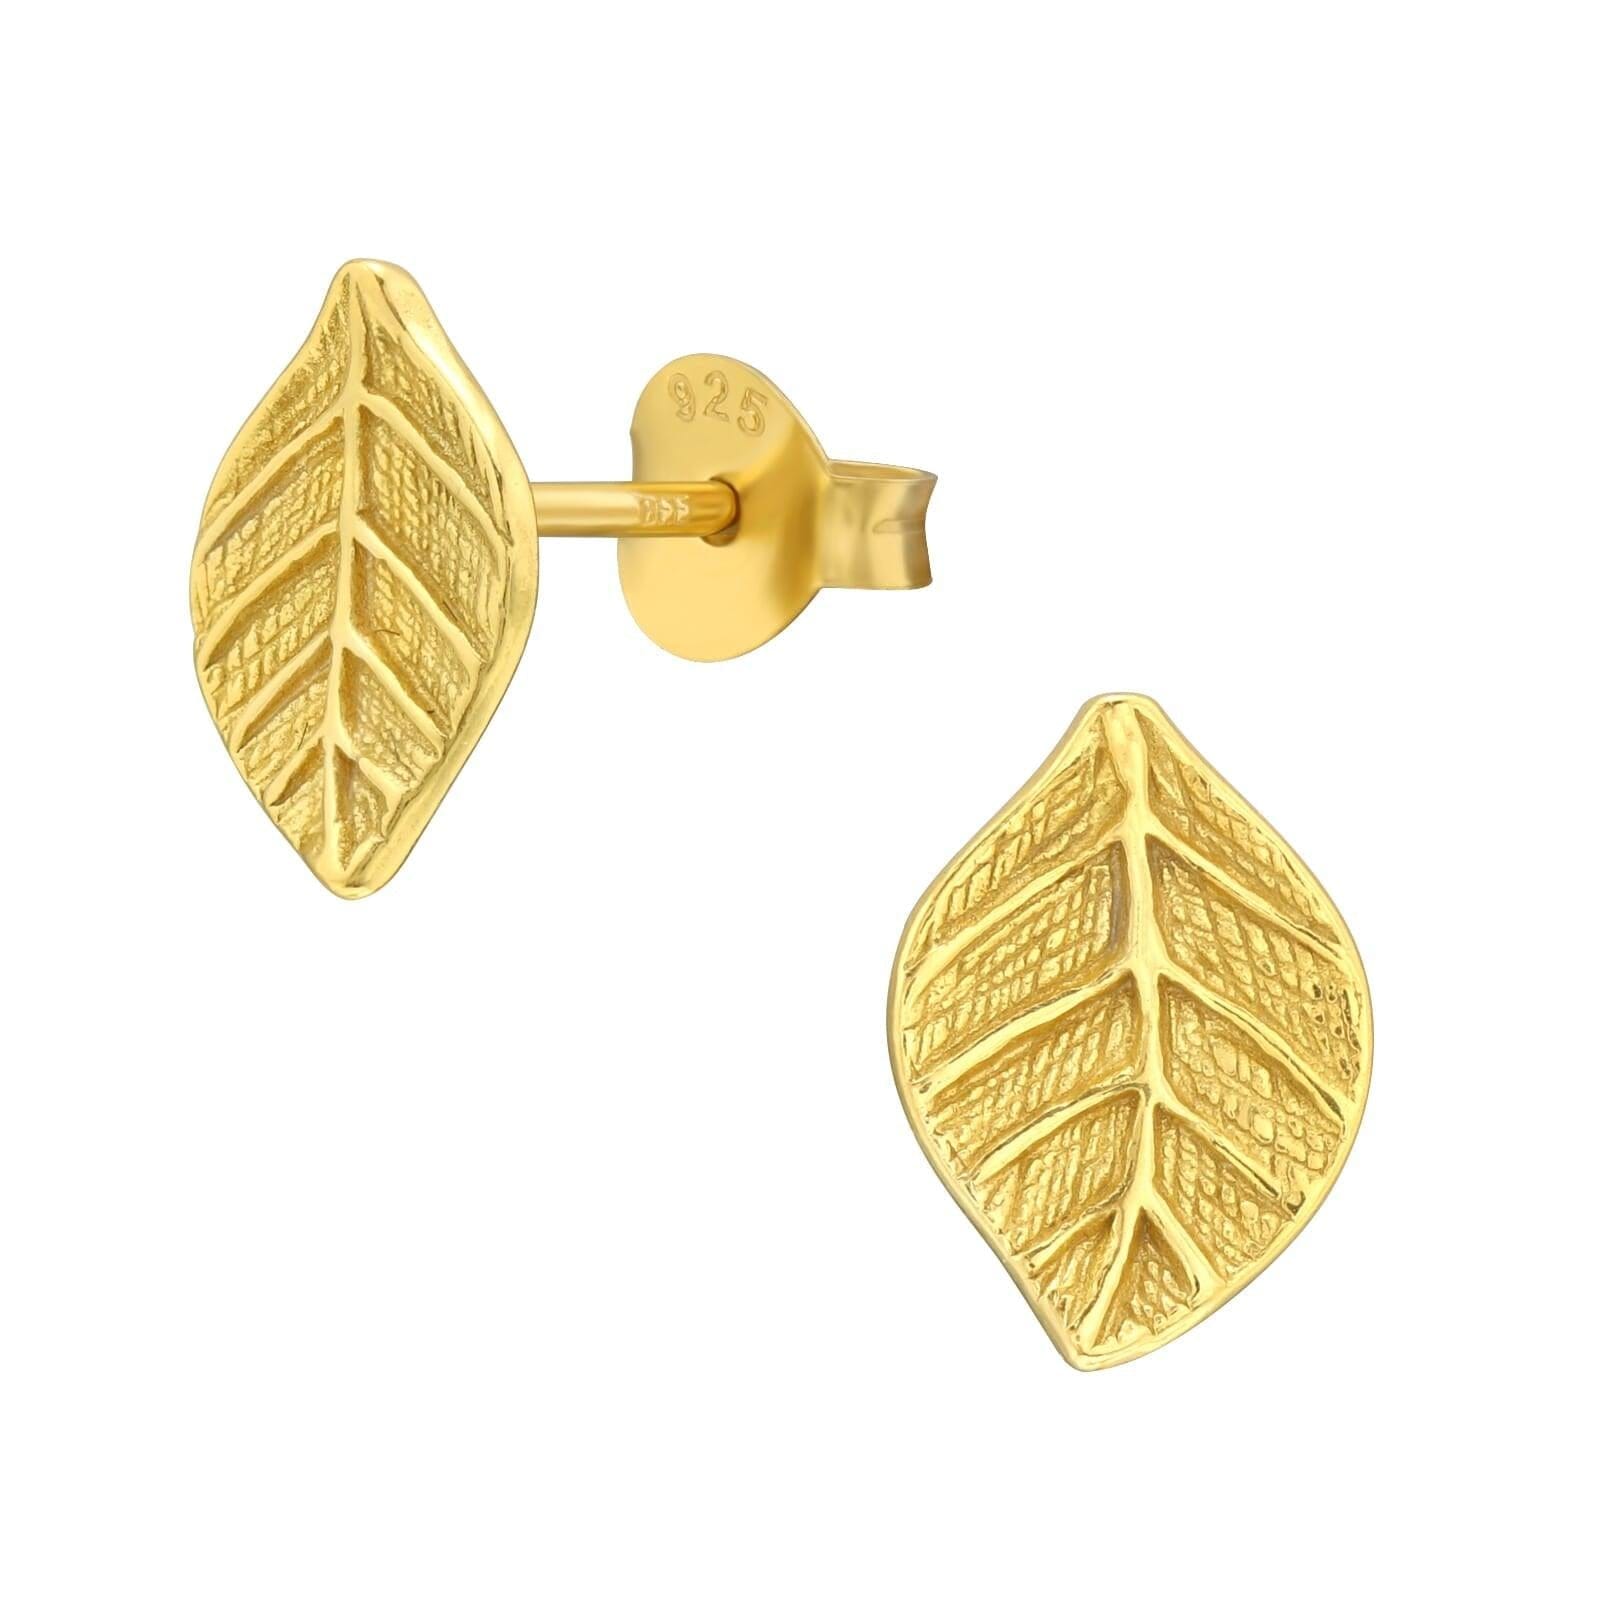 Asfour 925 Sterling Silver Earring, Gold